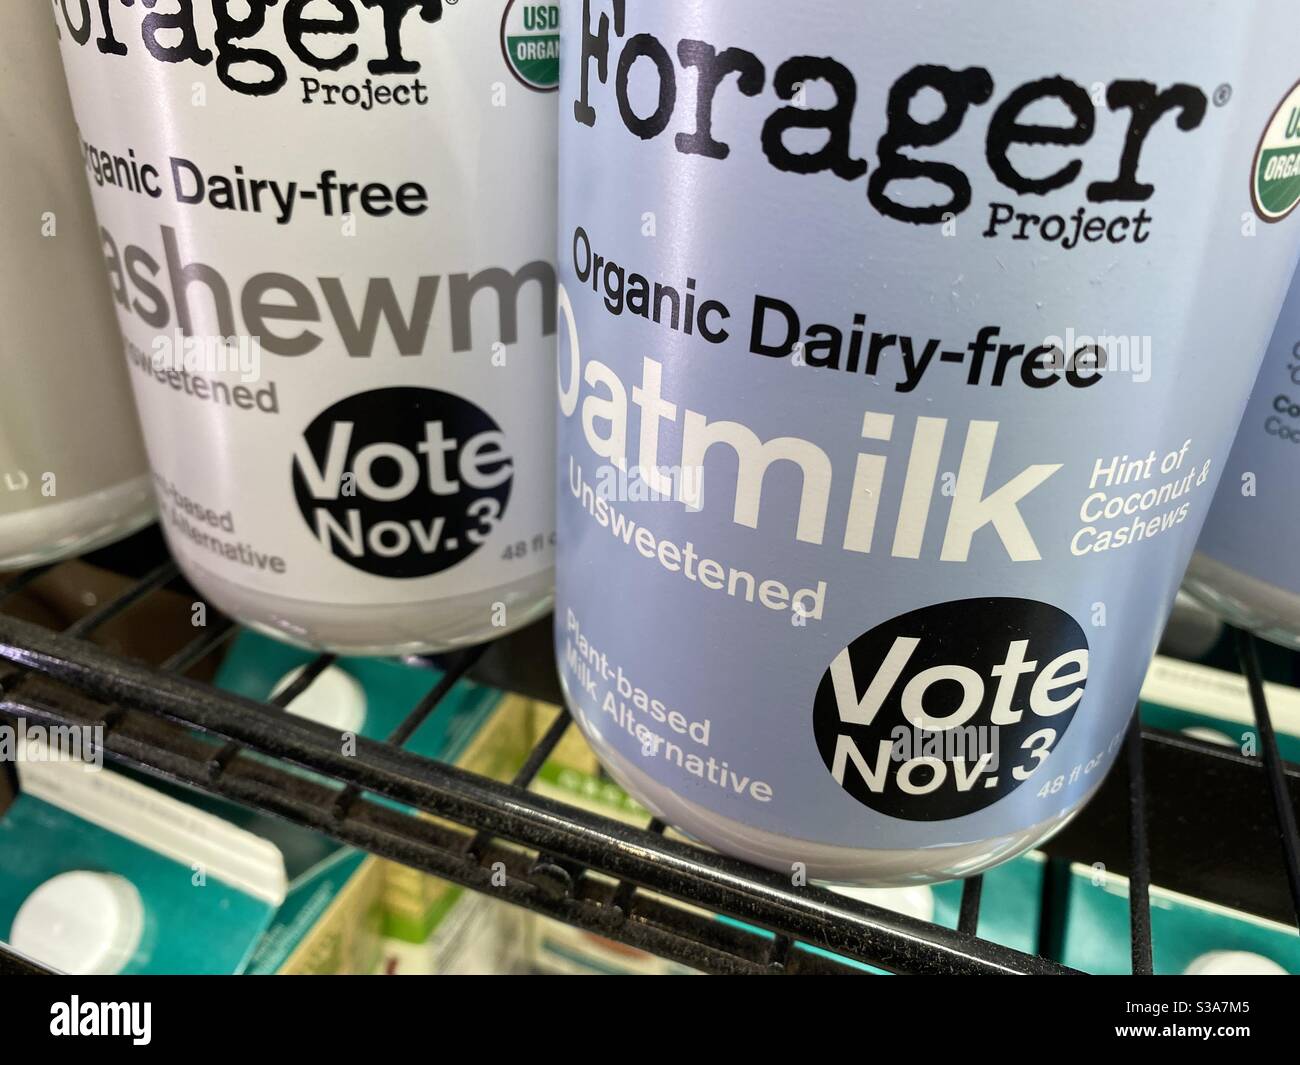 Packaged goods companies encourage consumers to vote on November 3rd in the US election. This packaging from Forager Project has a voting reminder on the label. Stock Photo